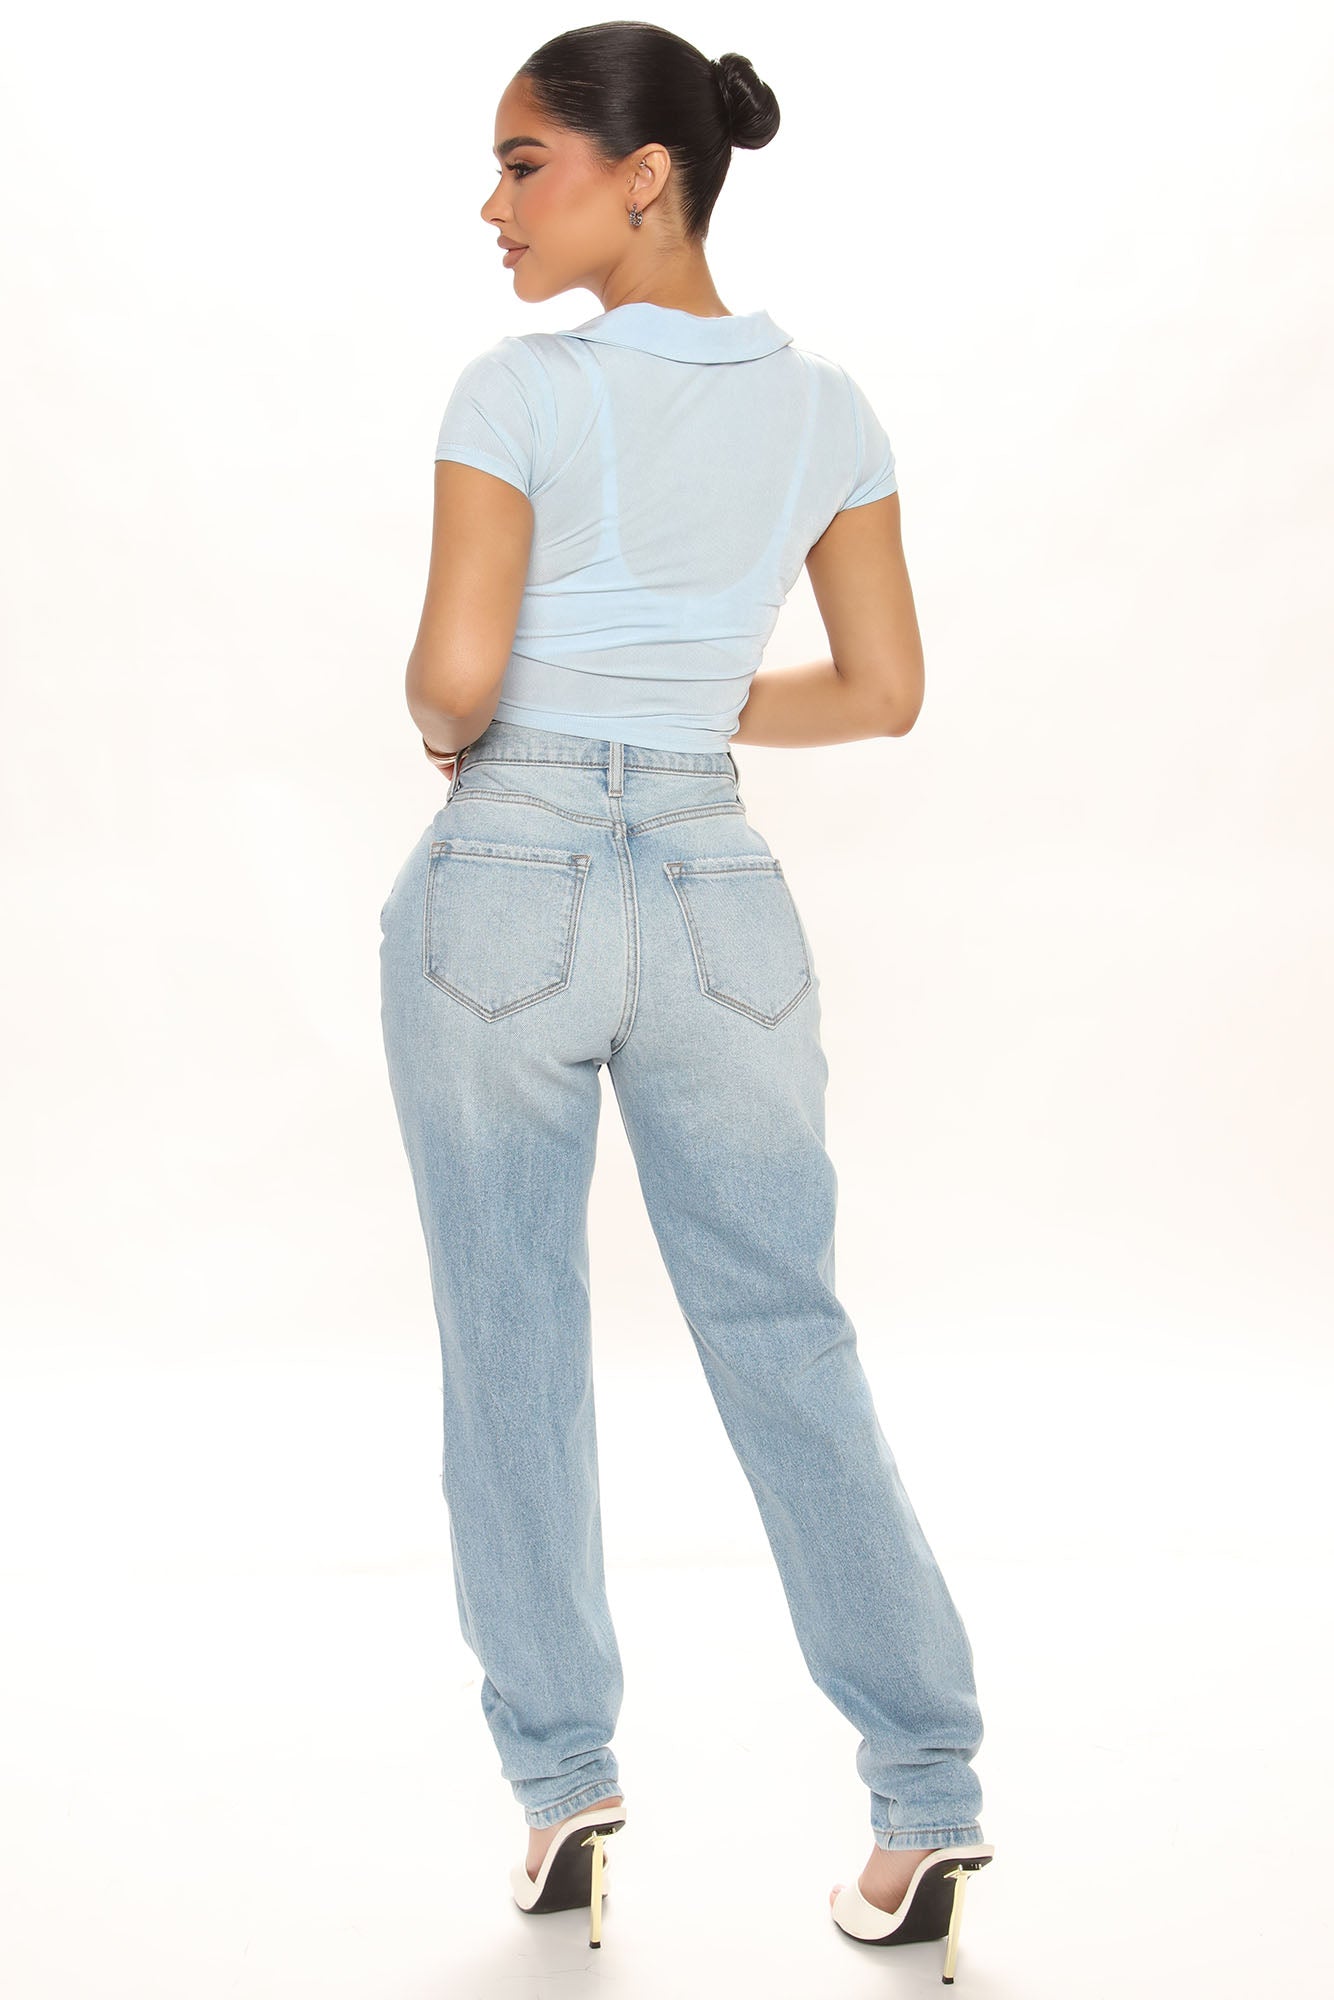 Classic Tapered Ripped Mom Jeans - Light Blue Wash